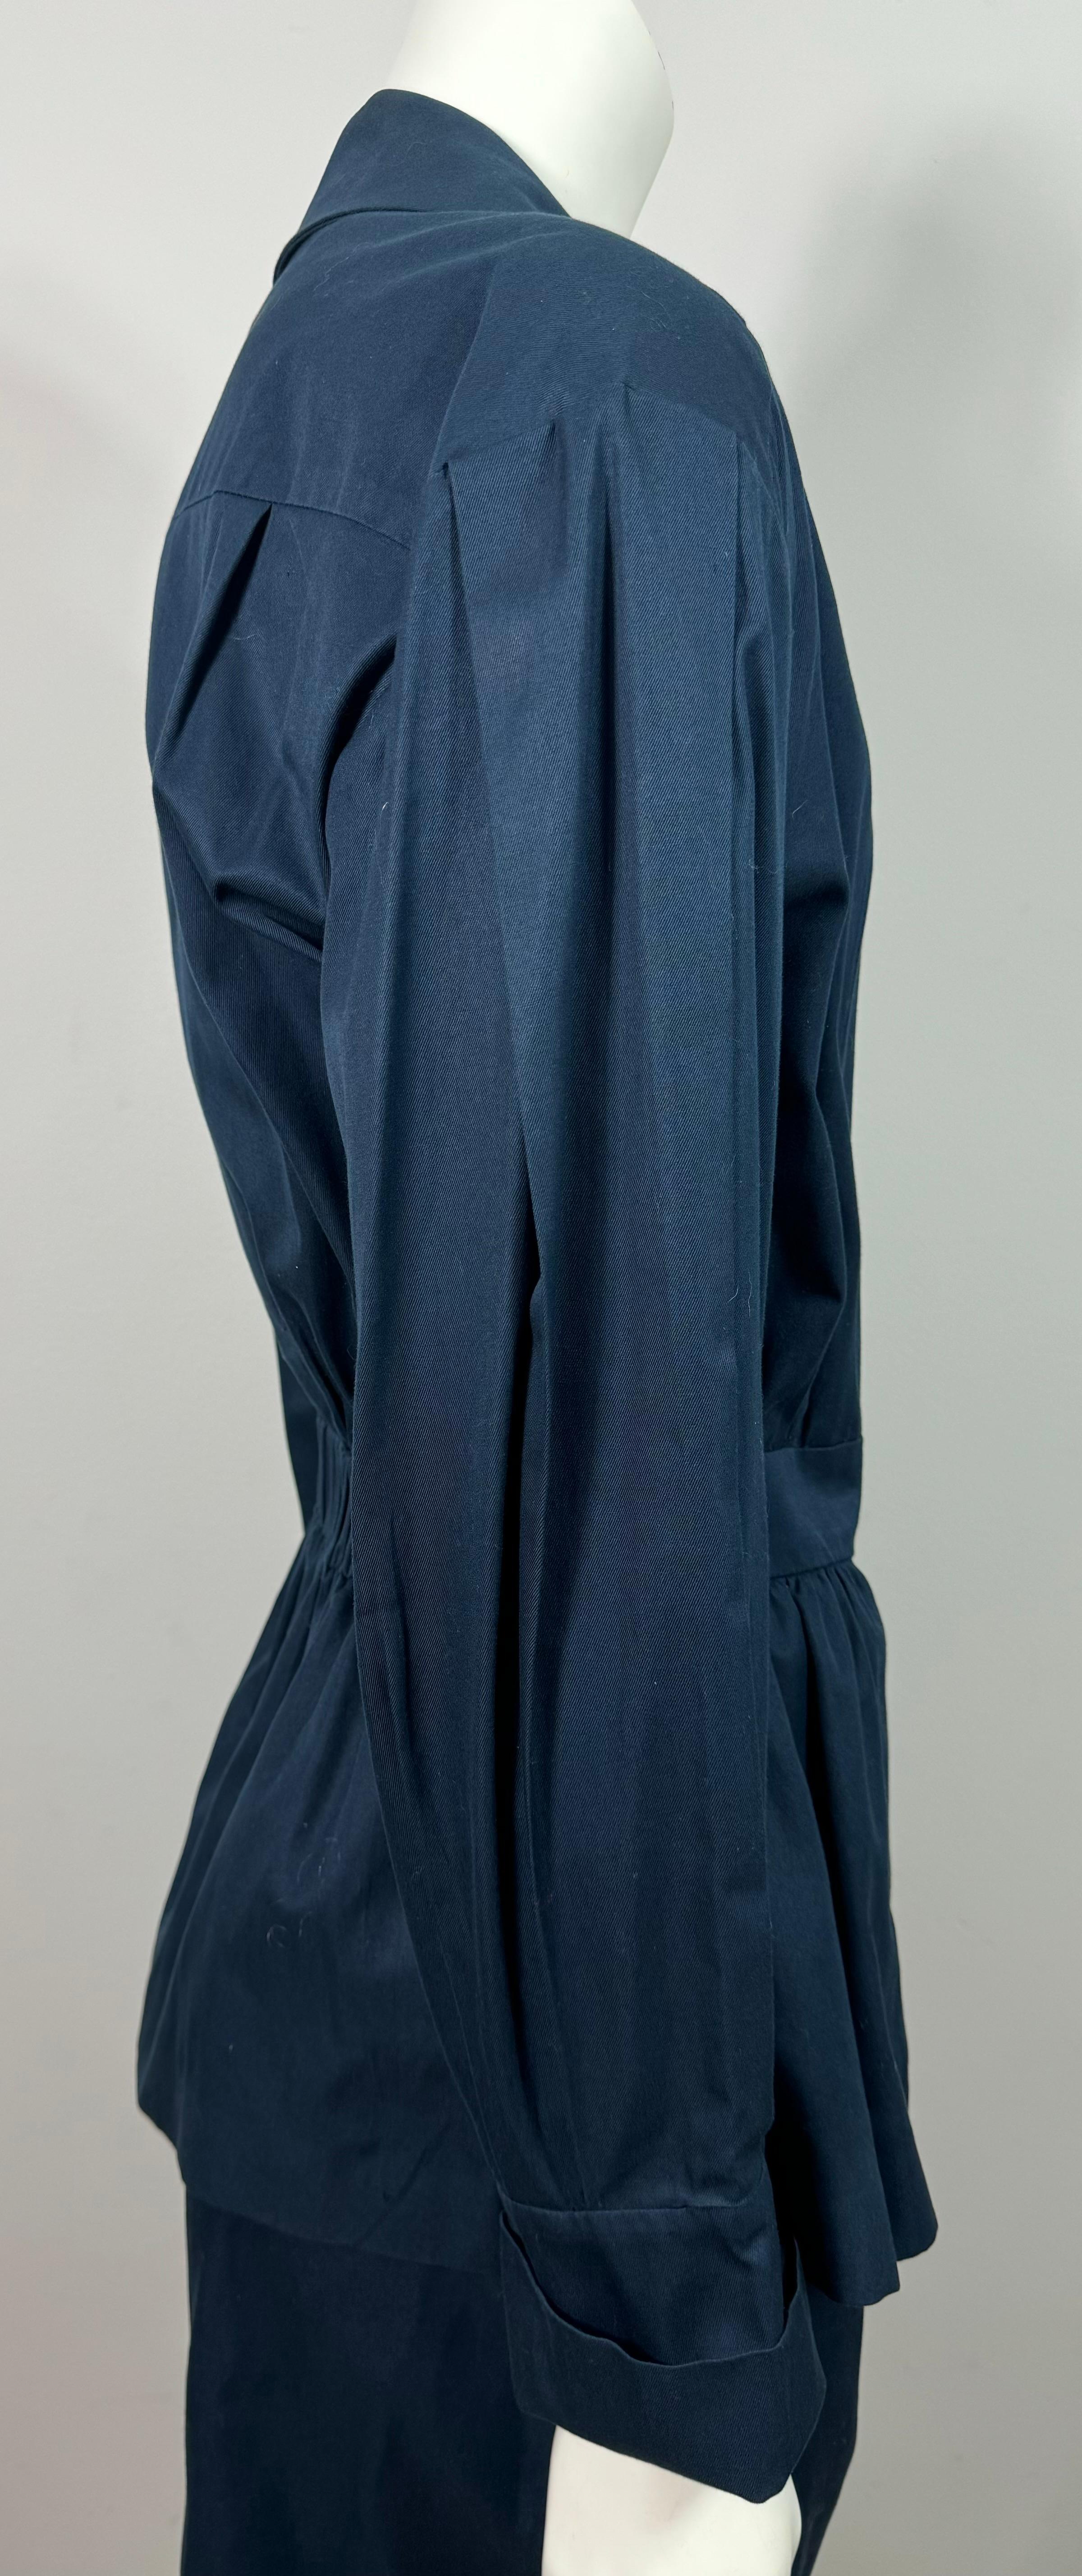 Chanel 1980's Navy Cotton Cinched Waist Jacket Skirt Suit - Size 38 For Sale 6